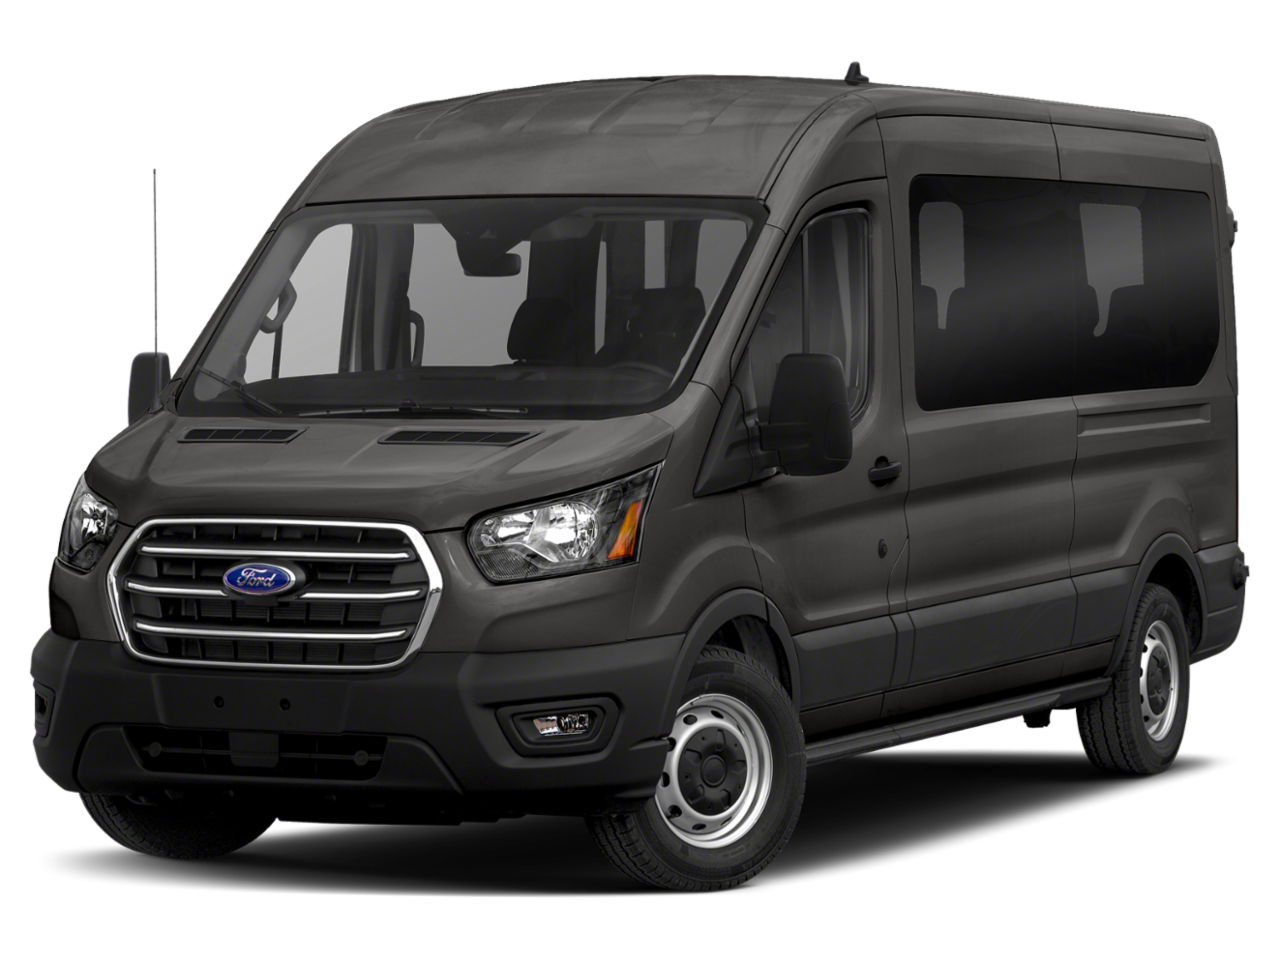 New Ford Transit Passenger Wagon from your Hinton, OK dealership, Wheeler.